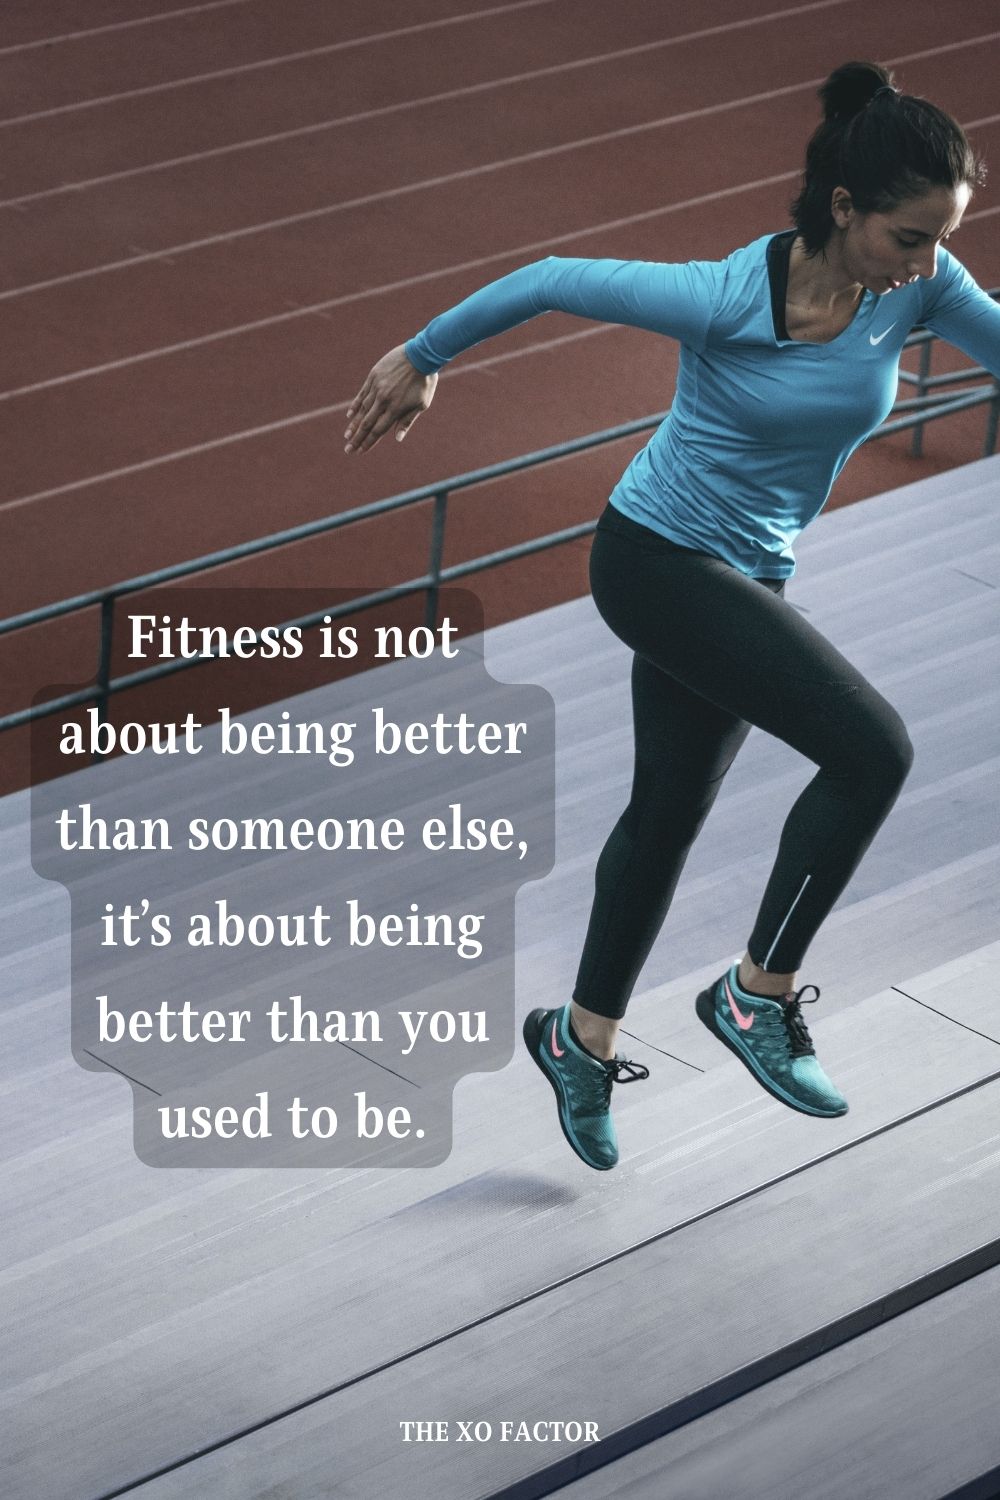 Fitness is not about being better than someone else, it’s about being better than you used to be.